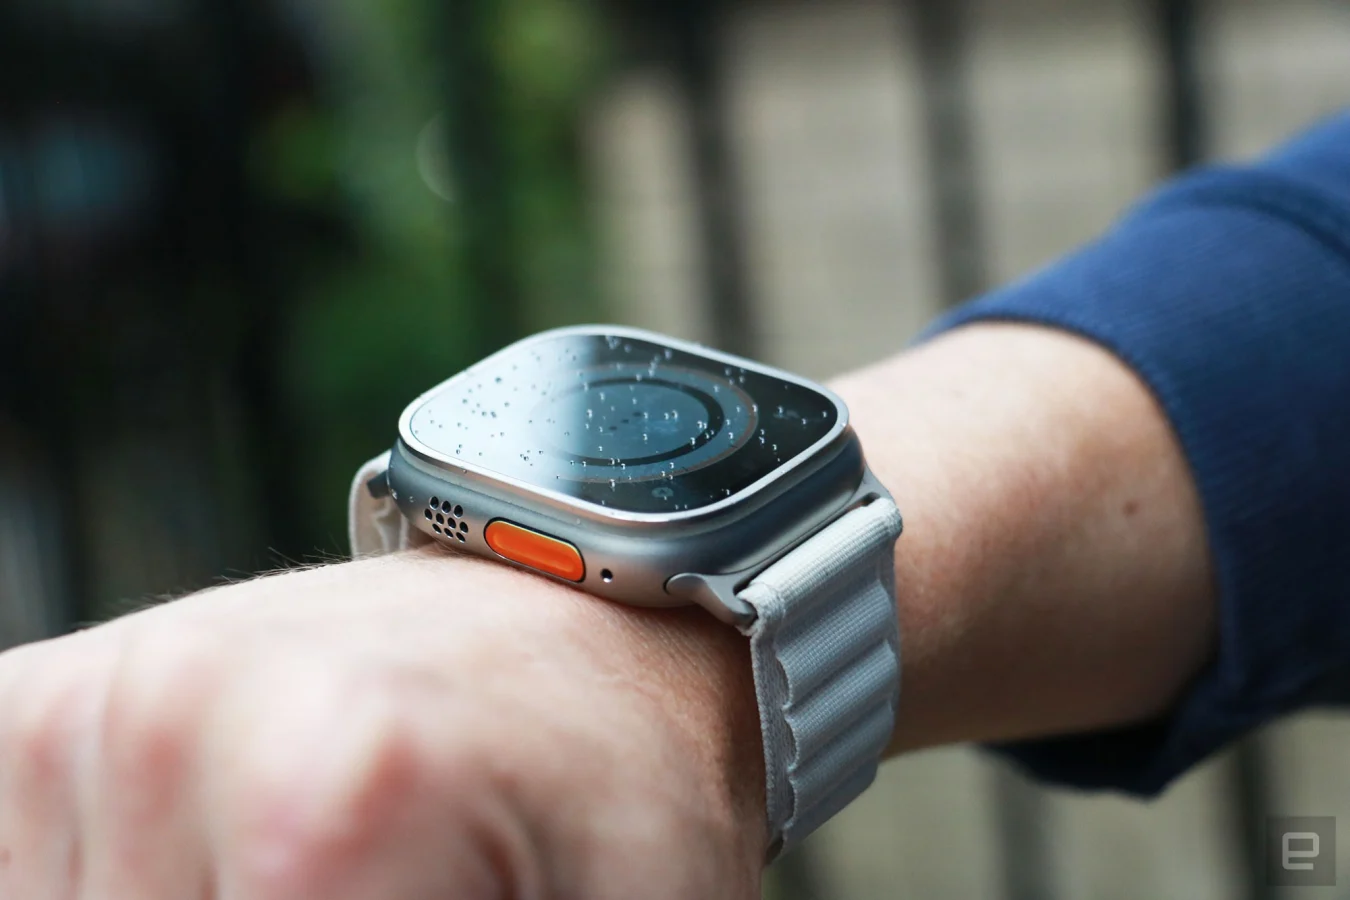 Off-angle view of Apple Watch Ultra with Alpine Loop on a person's wrist.  From this vantage point, the orange Action button and the speaker grill on the left edge are visible, while the screen content is dark.